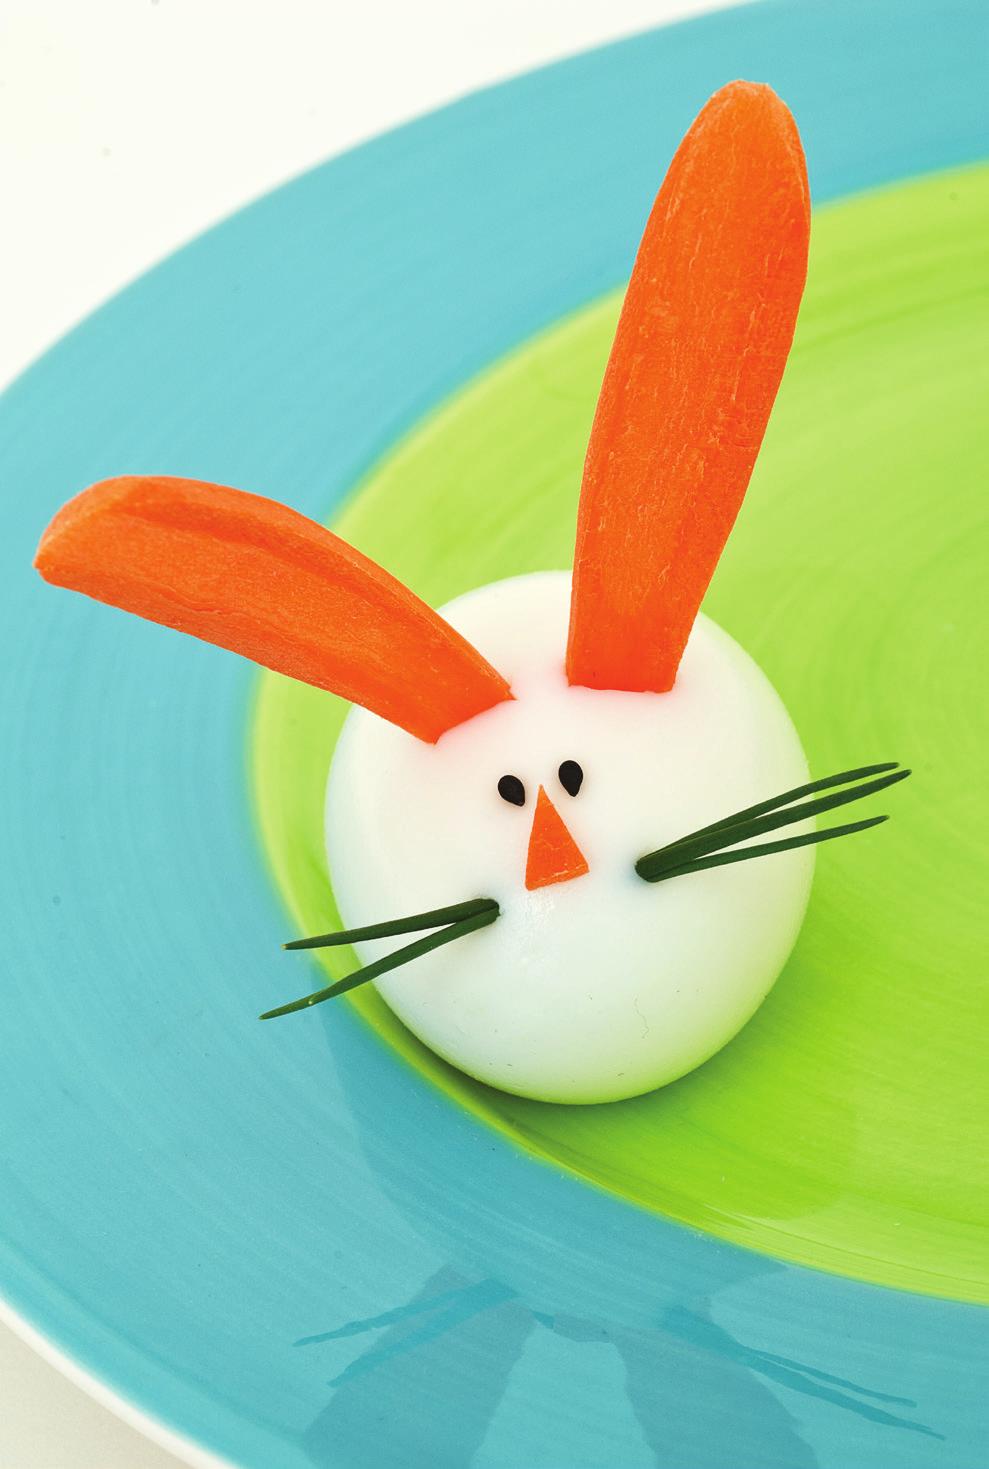 hard-boiled bunnies and chicks After dyeing and decorating your Easter eggs, turn them into sweet-faced critters.